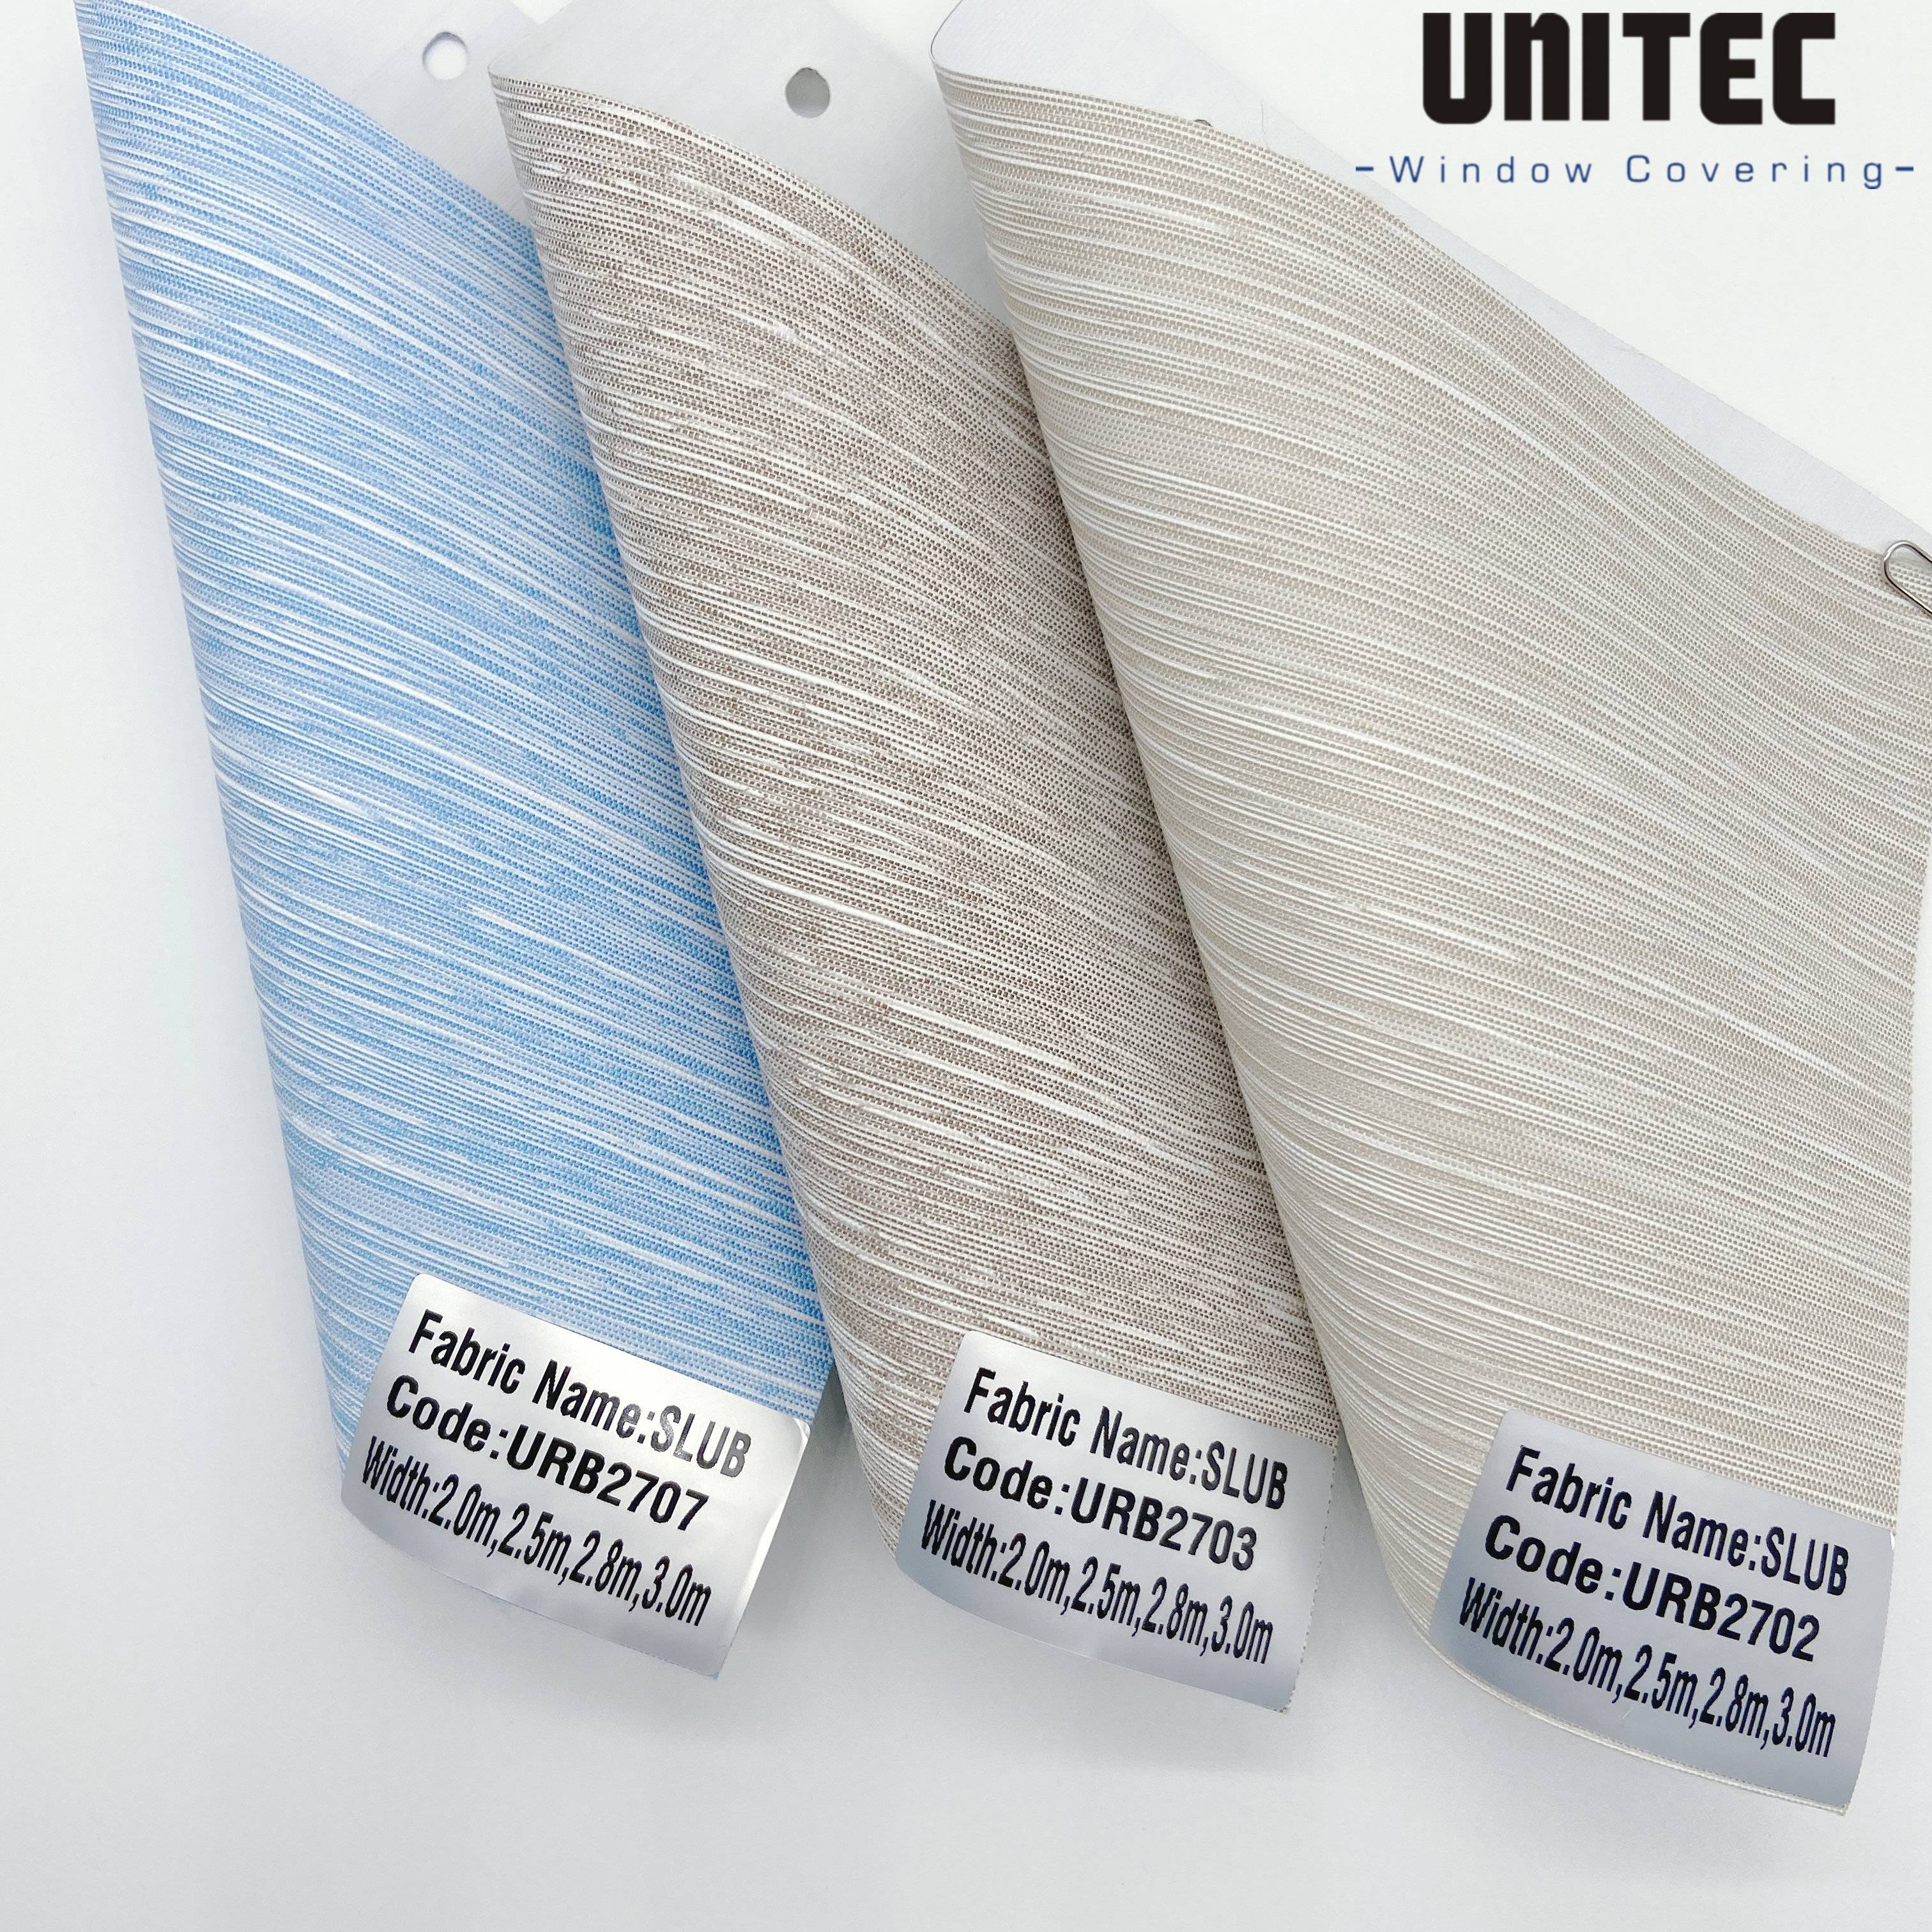 UNITEC Direct manufacturer High Quality Blackout Blinds Fabric URB81 Series Featured Image